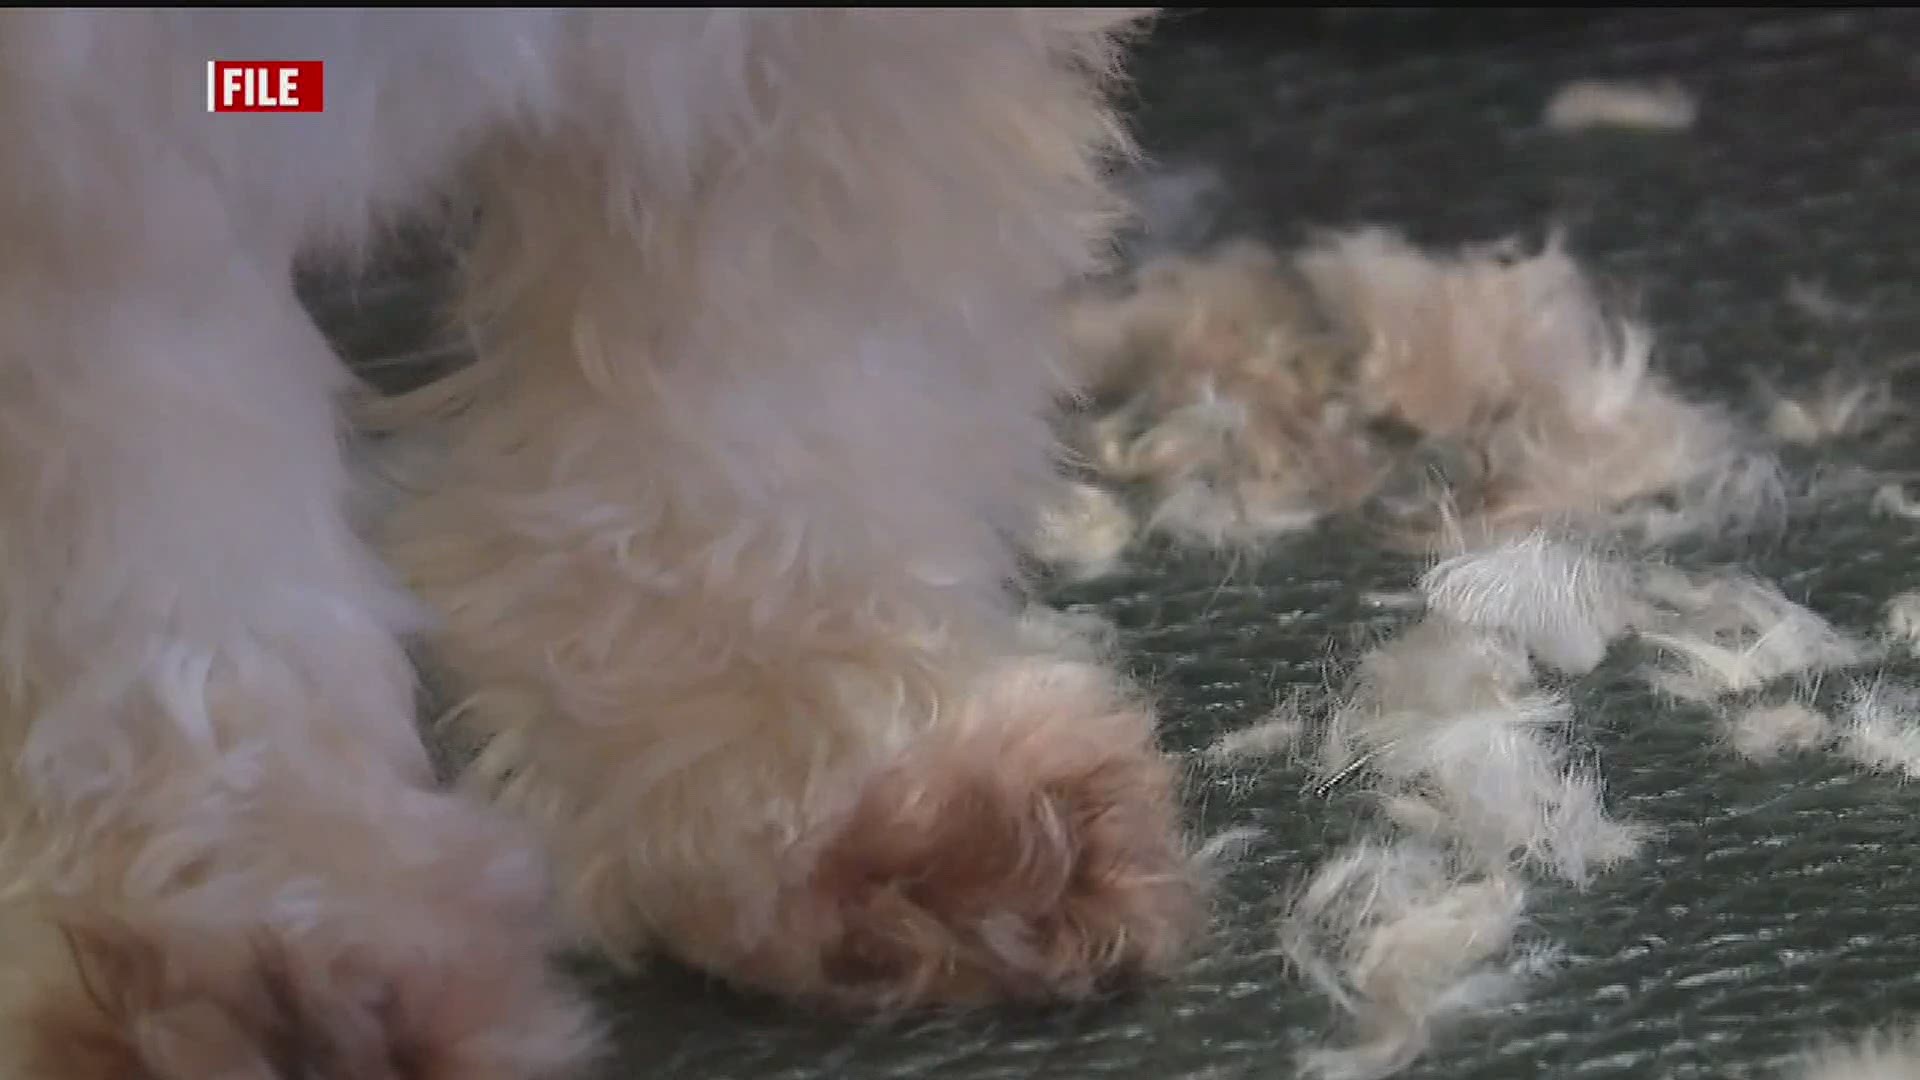 They say un-groomed pets can lead to health problems and infections